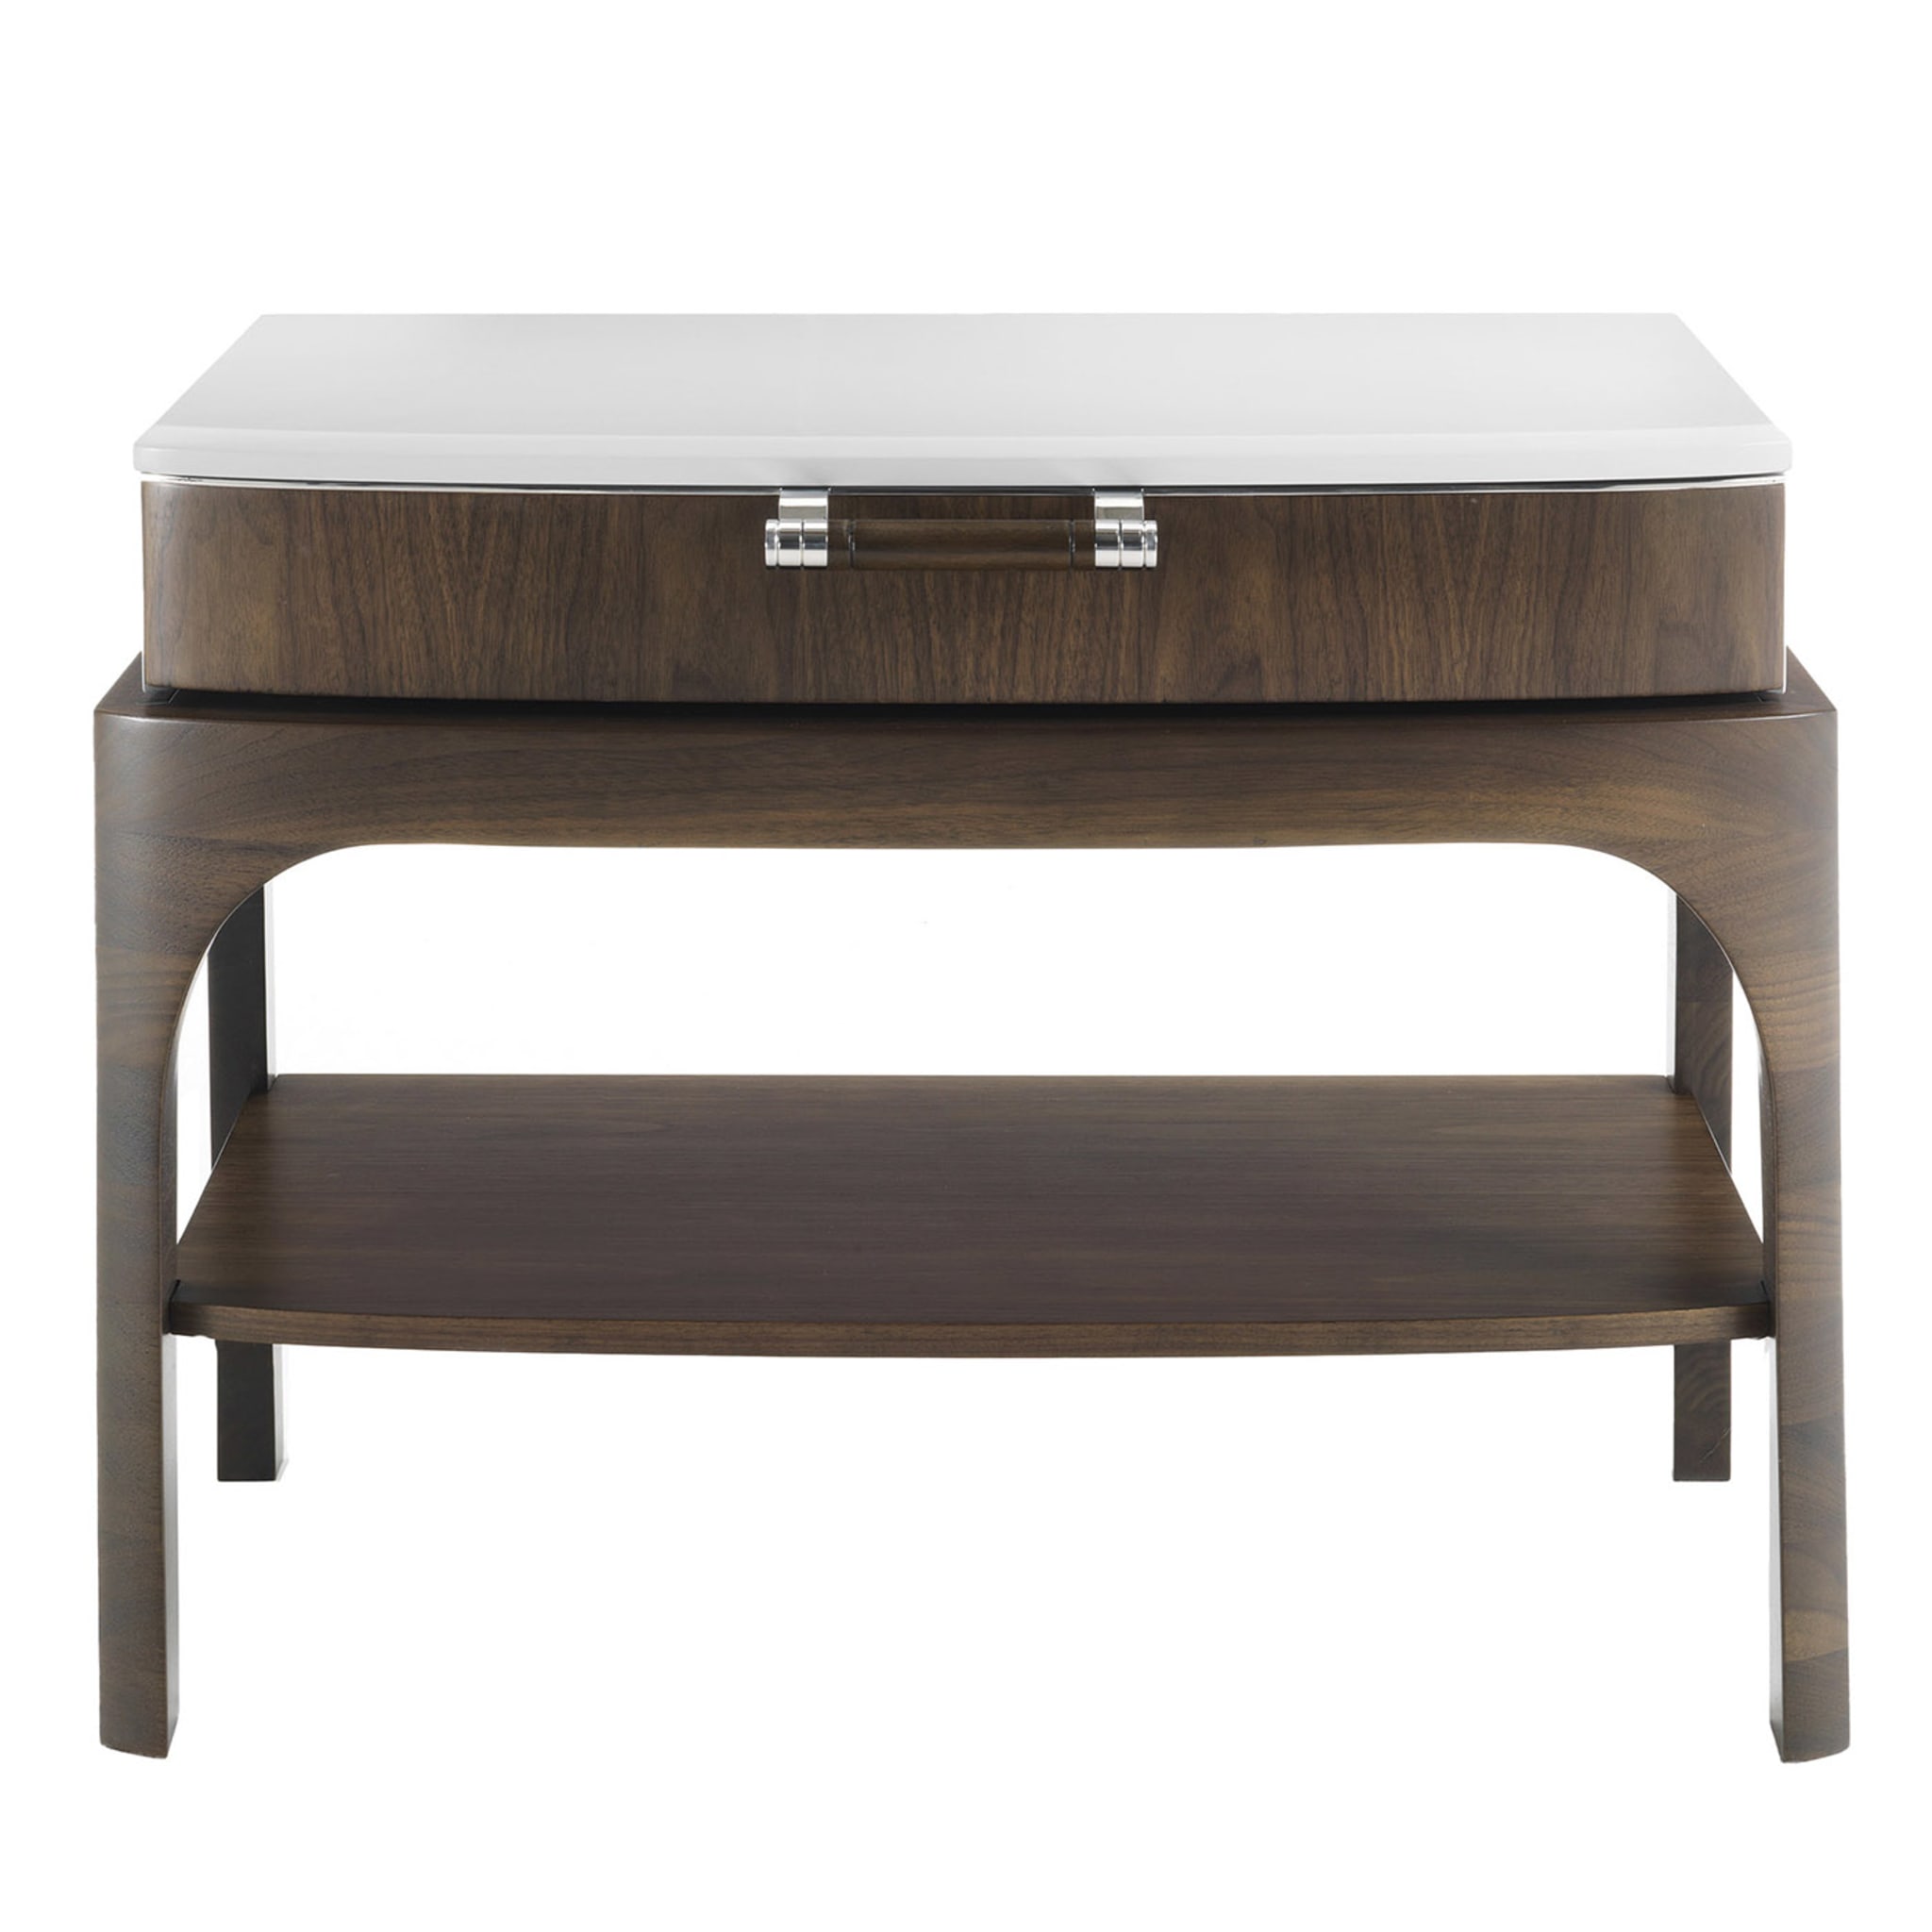 Canaletto Walnut Bedside Table - Main view